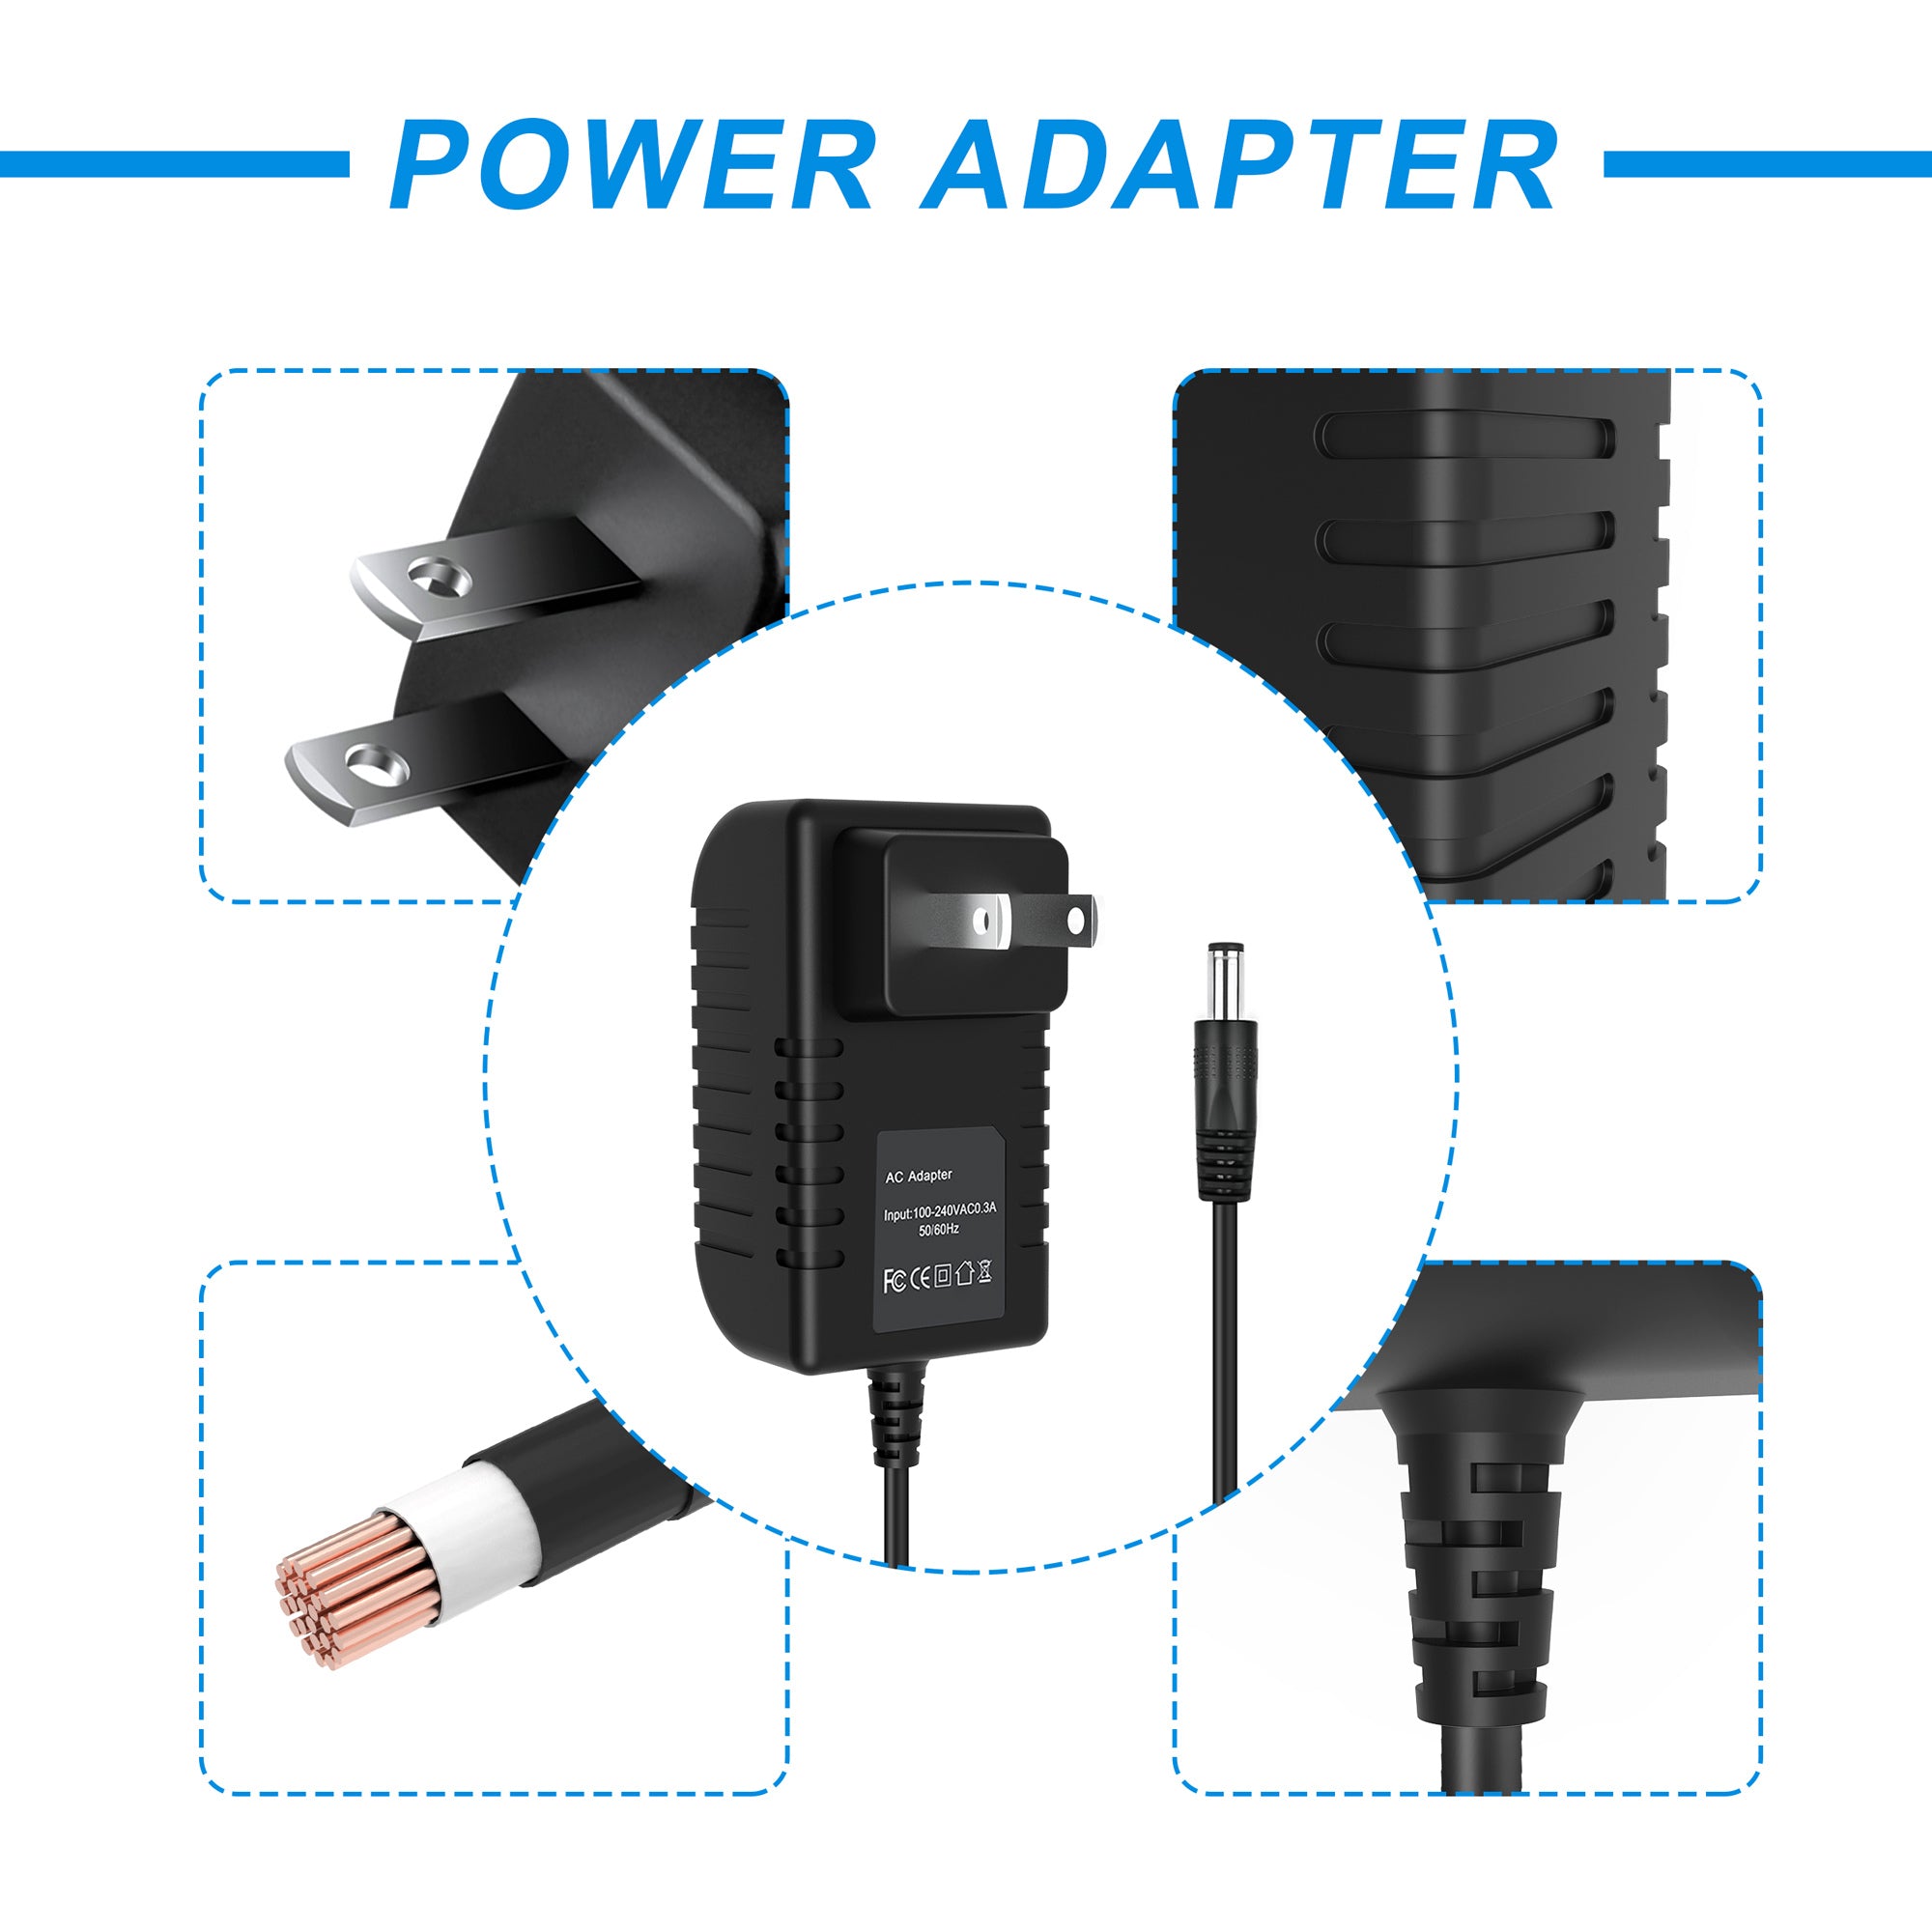 AbleGrid 5V 3A AC Adapter Charger Power Supply Cord Compatible with D-Link DI-624 DI-704GU Router PSU